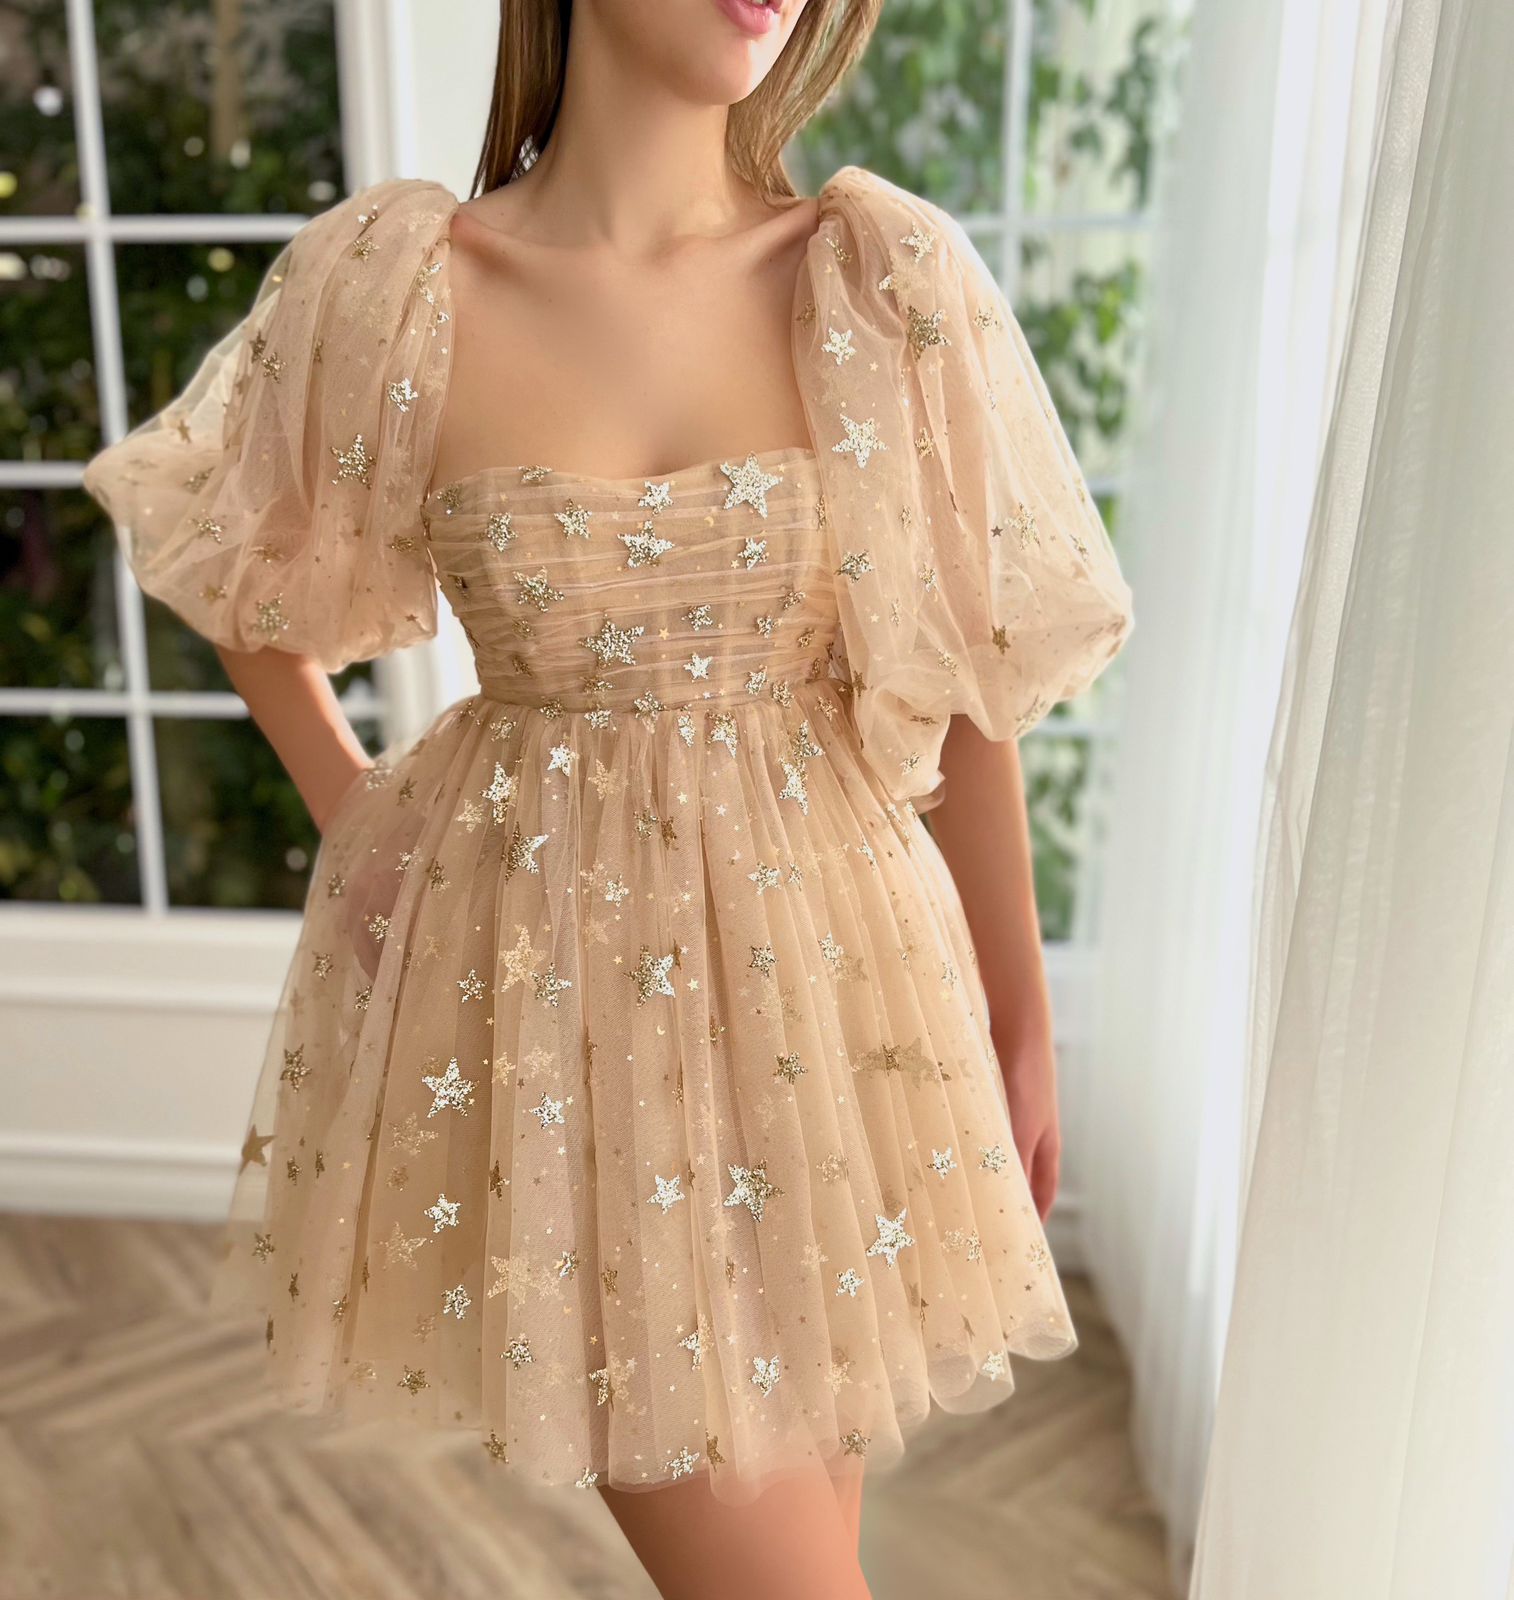 Beige mini dress with starry fabric and short sleeves